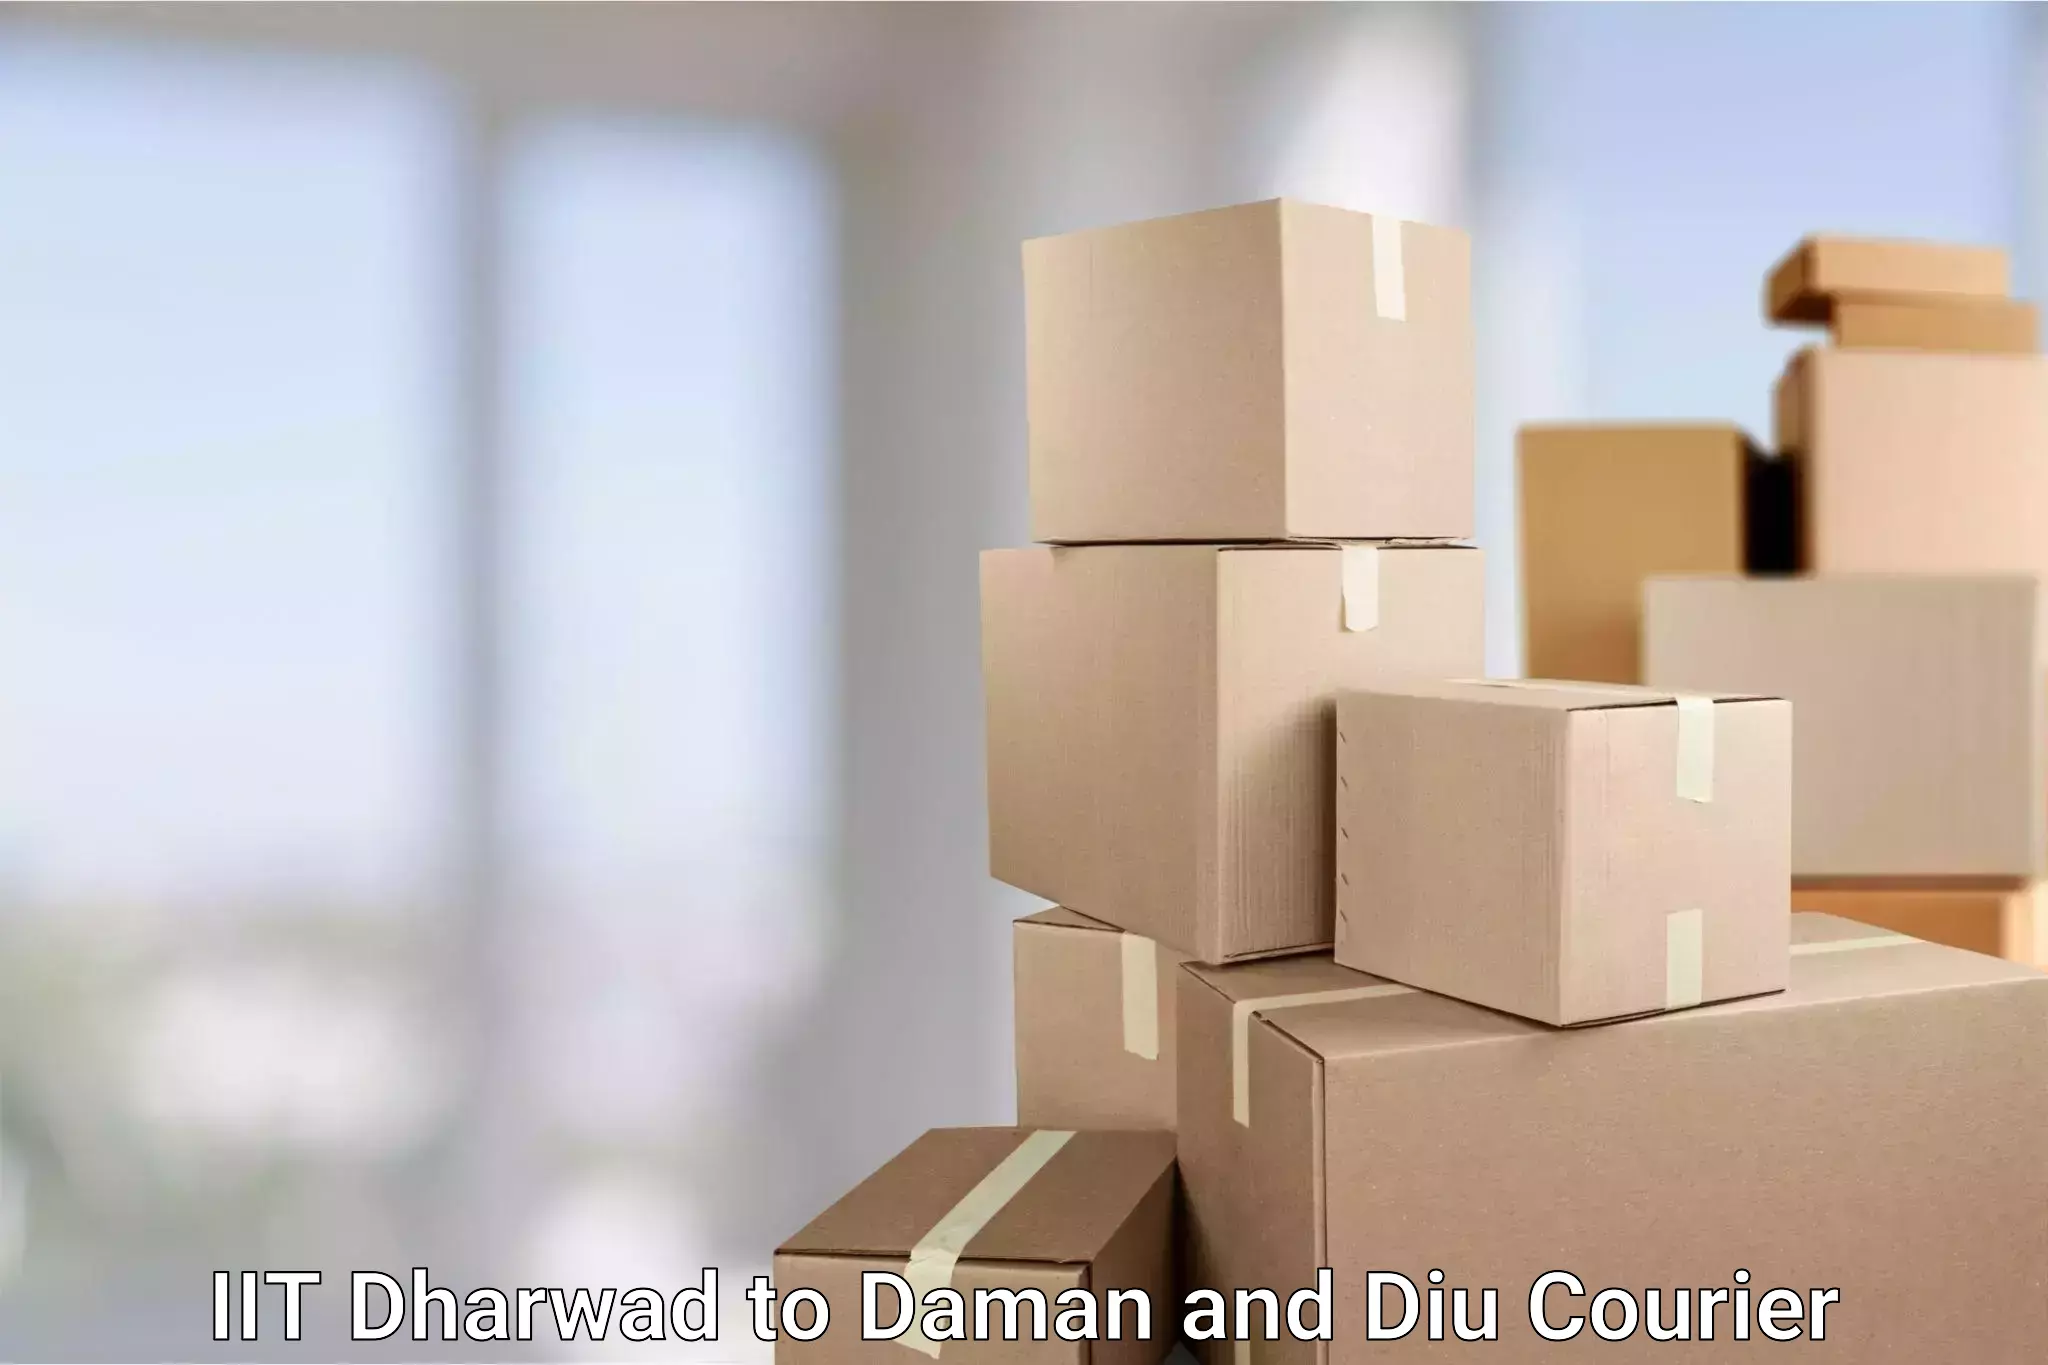 Small business couriers IIT Dharwad to Daman and Diu